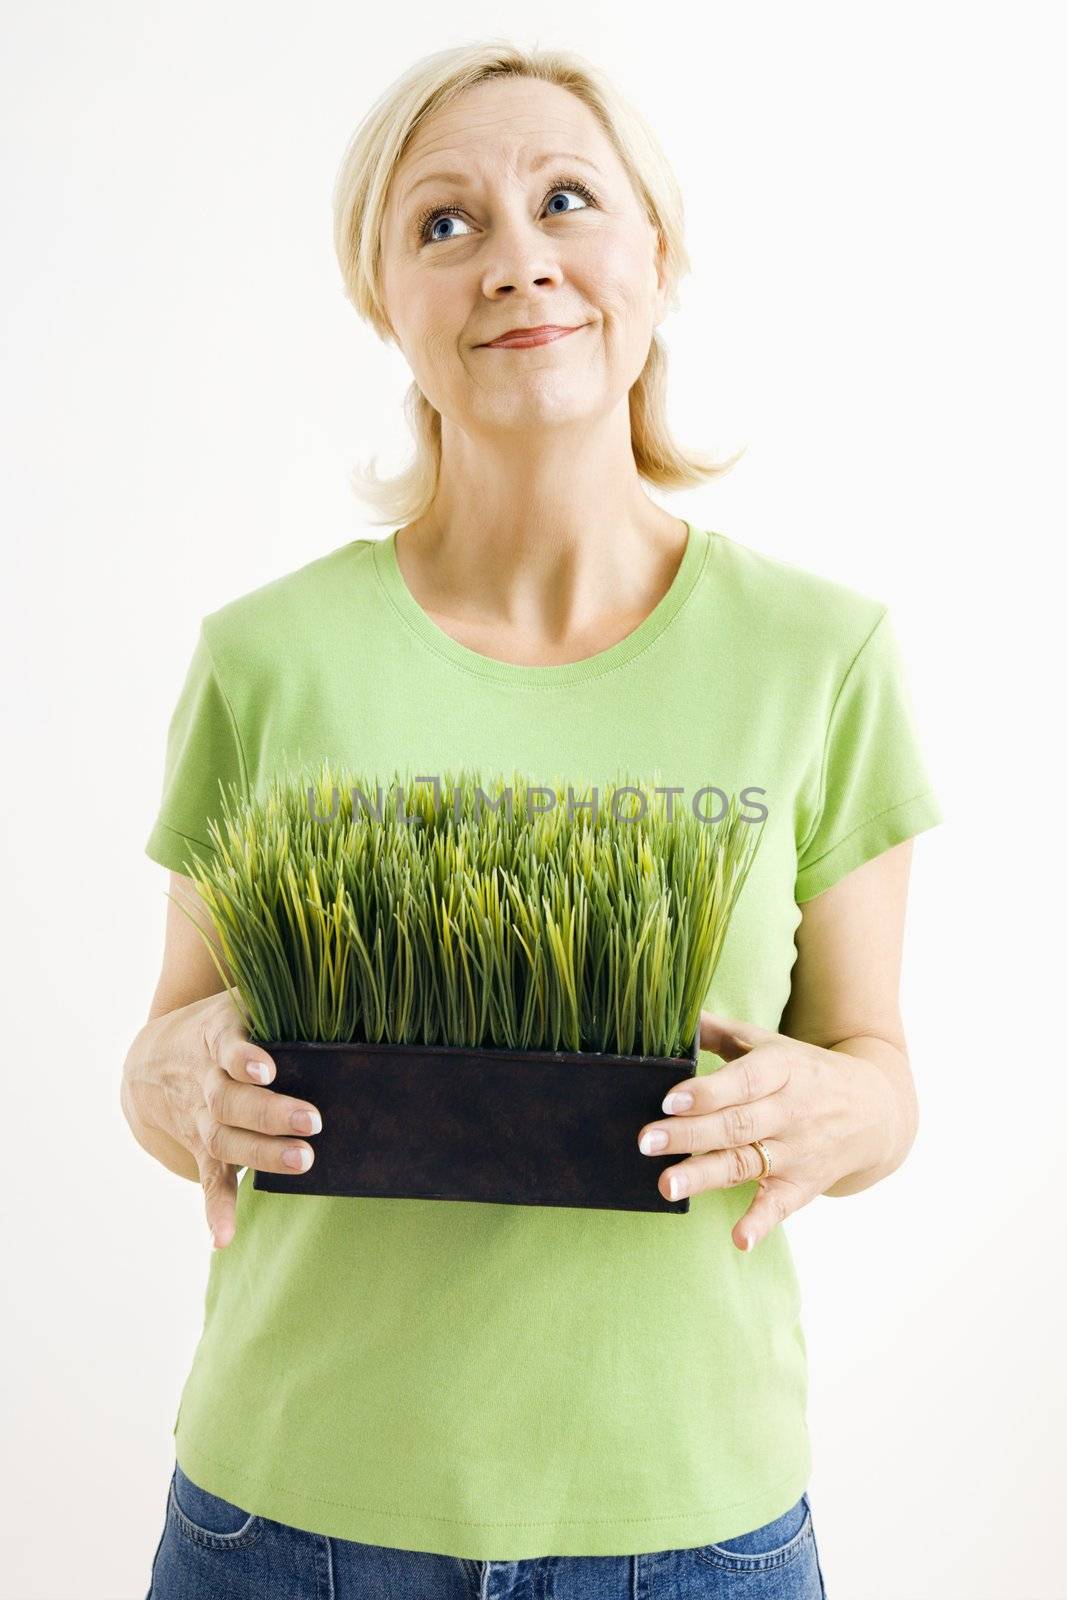 Portrait of attractive adult woman holding pot of grass and looking up.